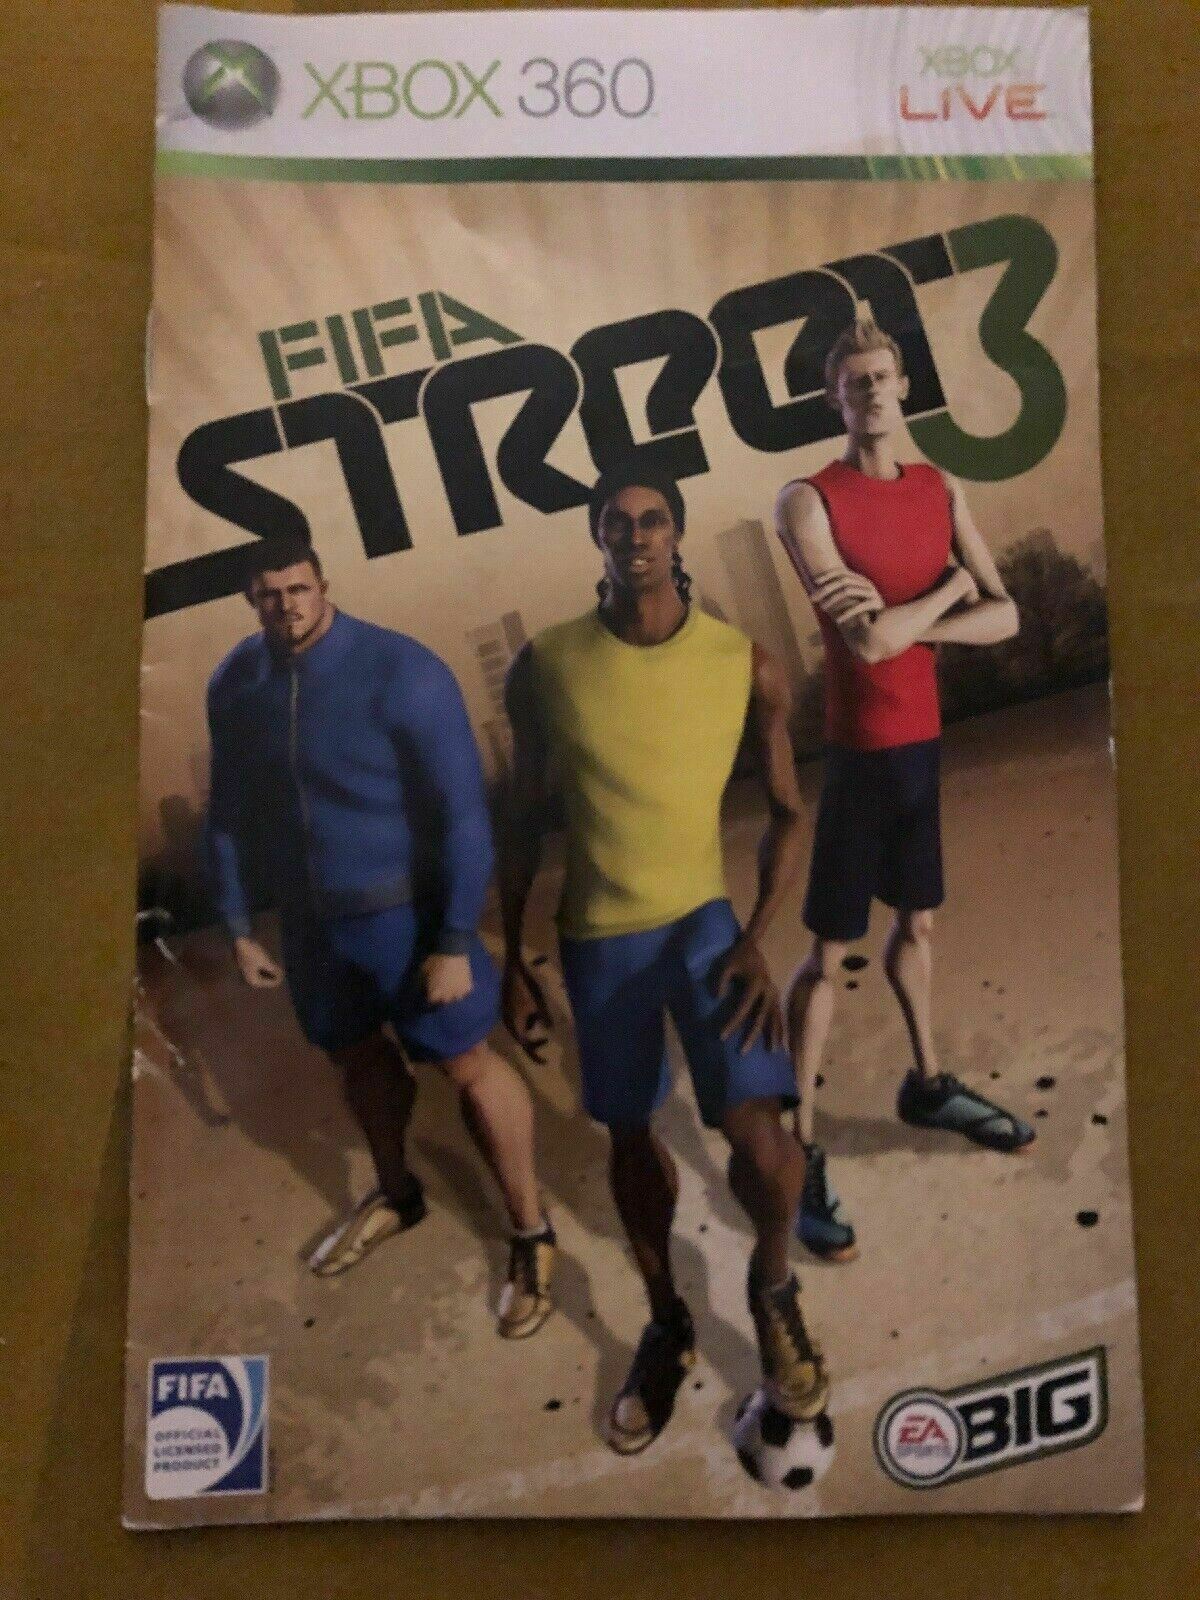 FIFA Street 3 - Microsoft XBOX 360 PAL Game Complete with Manual